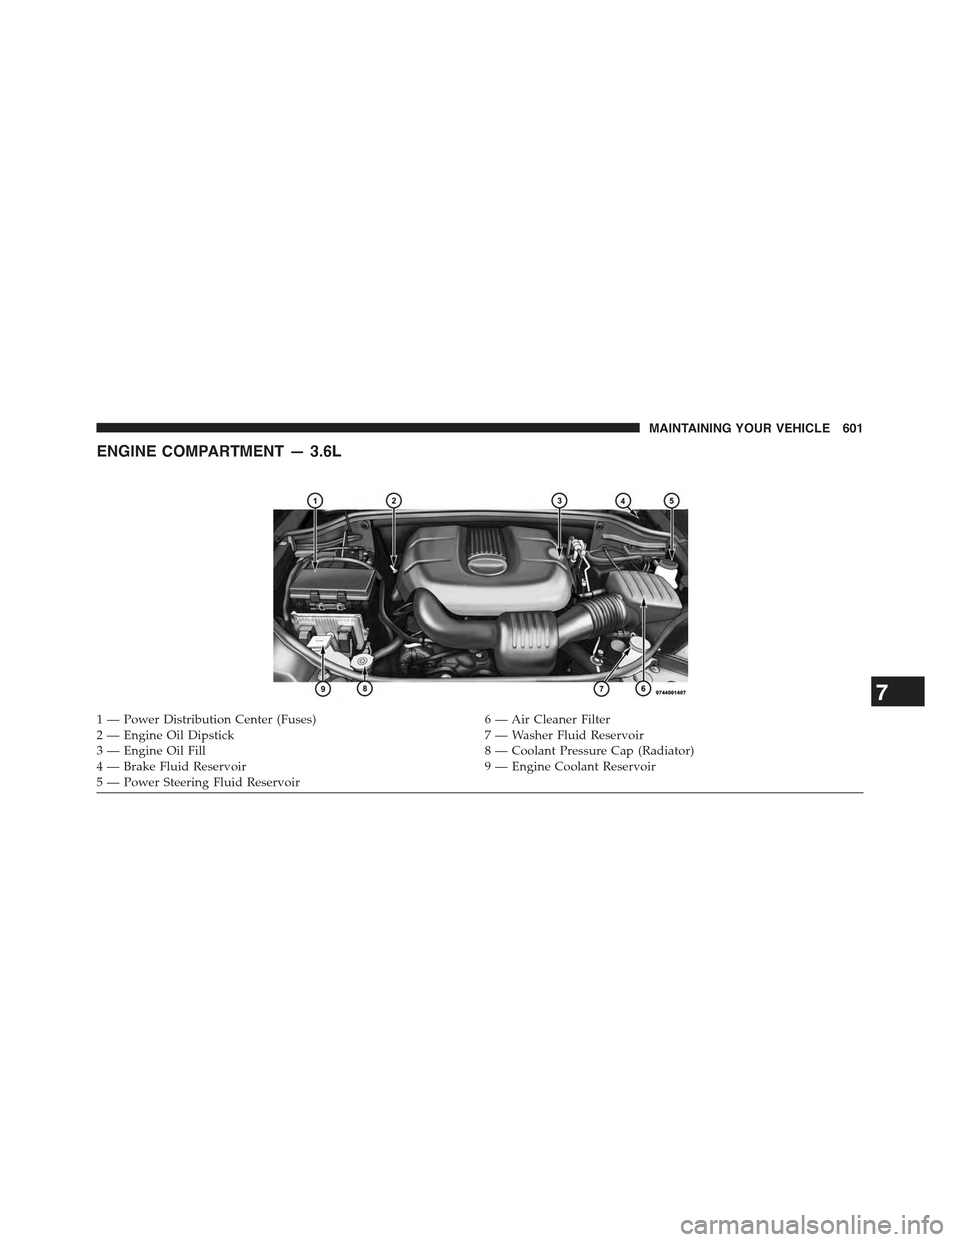 JEEP GRAND CHEROKEE 2015 WK2 / 4.G Owners Manual ENGINE COMPARTMENT — 3.6L
1 — Power Distribution Center (Fuses)6 — Air Cleaner Filter2 — Engine Oil Dipstick7 — Washer Fluid Reservoir3 — Engine Oil Fill8 — Coolant Pressure Cap (Radiato